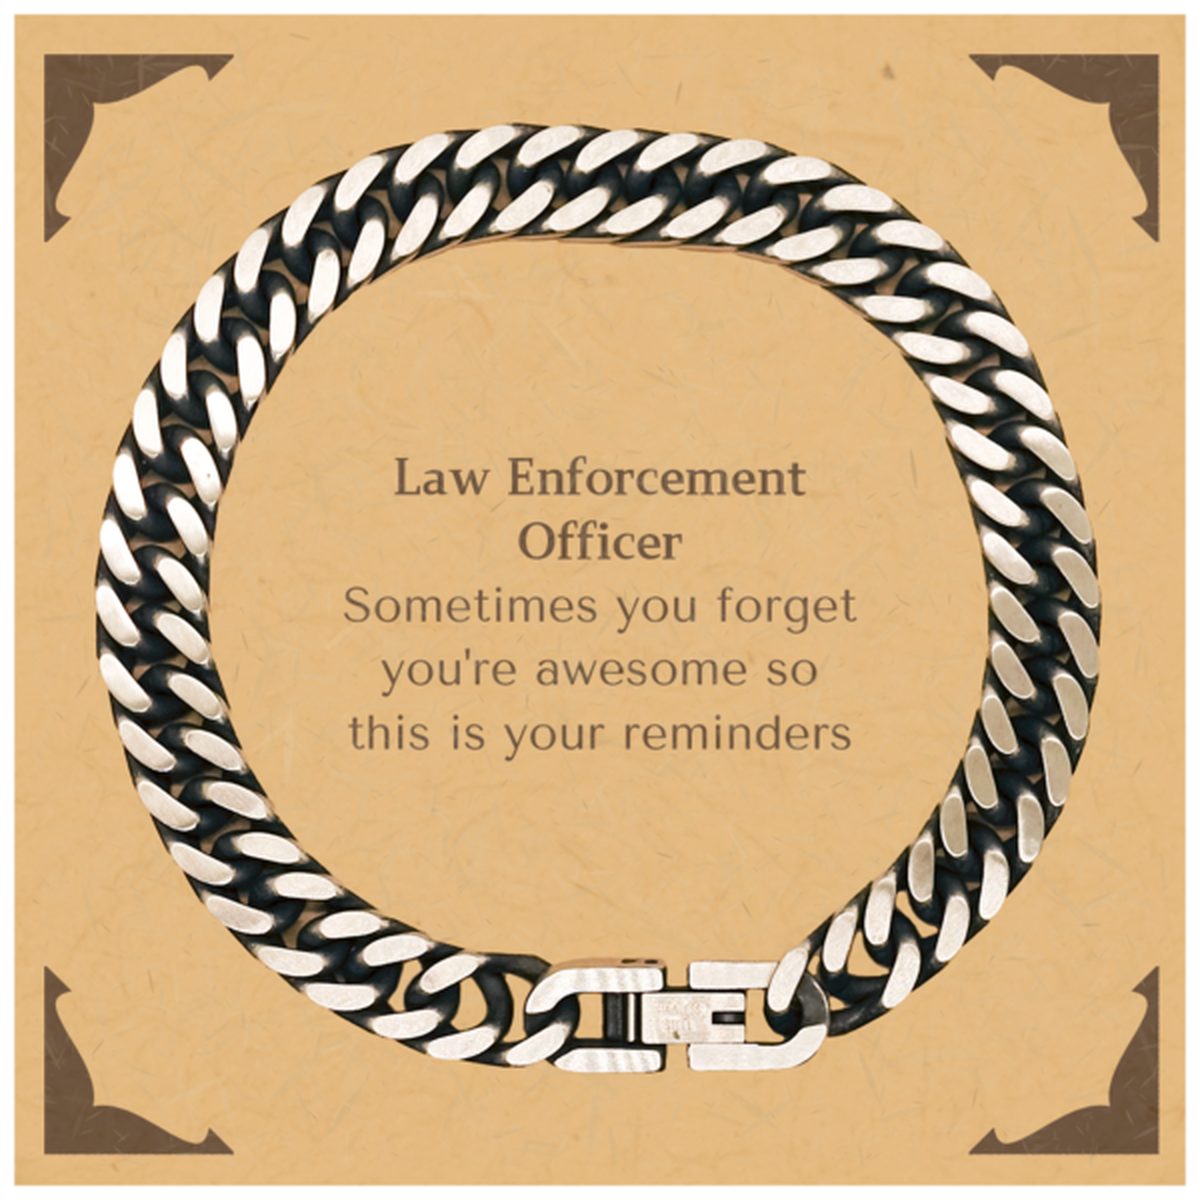 Sentimental Law Enforcement Officer Cuban Link Chain Bracelet, Law Enforcement Officer Sometimes you forget you're awesome so this is your reminders, Graduation Christmas Birthday Gifts for Law Enforcement Officer, Men, Women, Coworkers